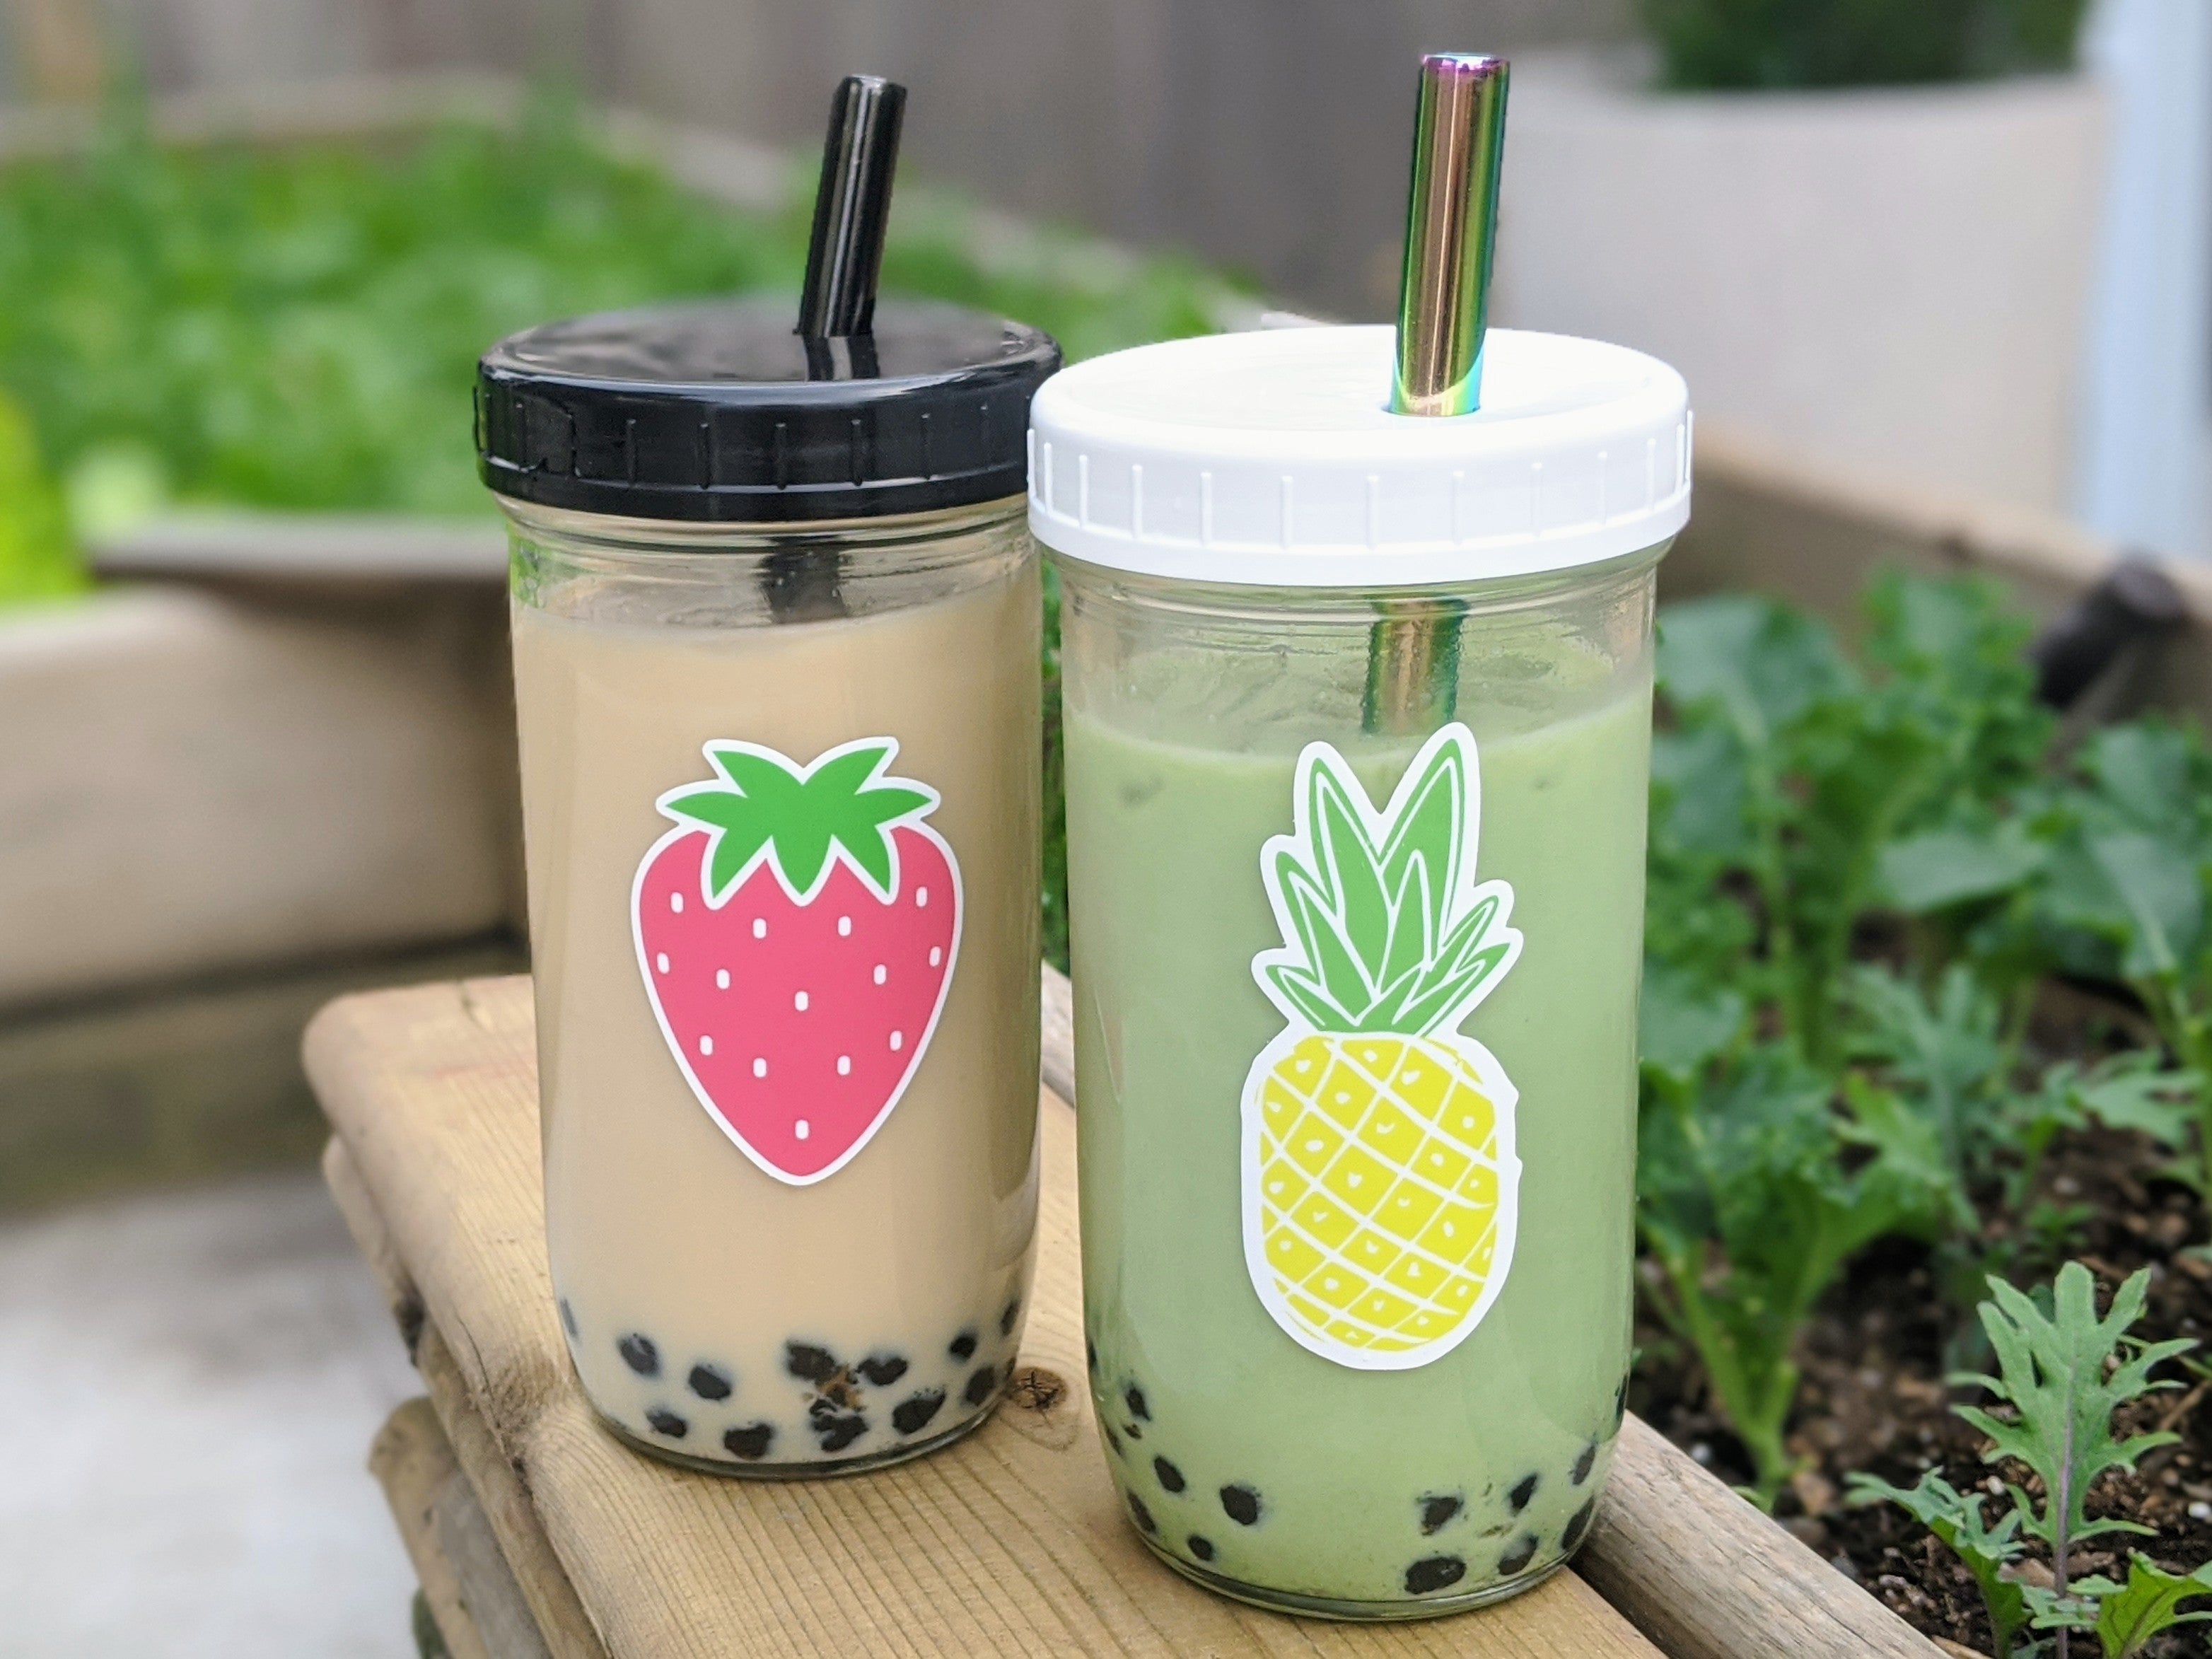 4 Pack Glass Cups with Lids and Straws, Reusable Bubble Tea Cup